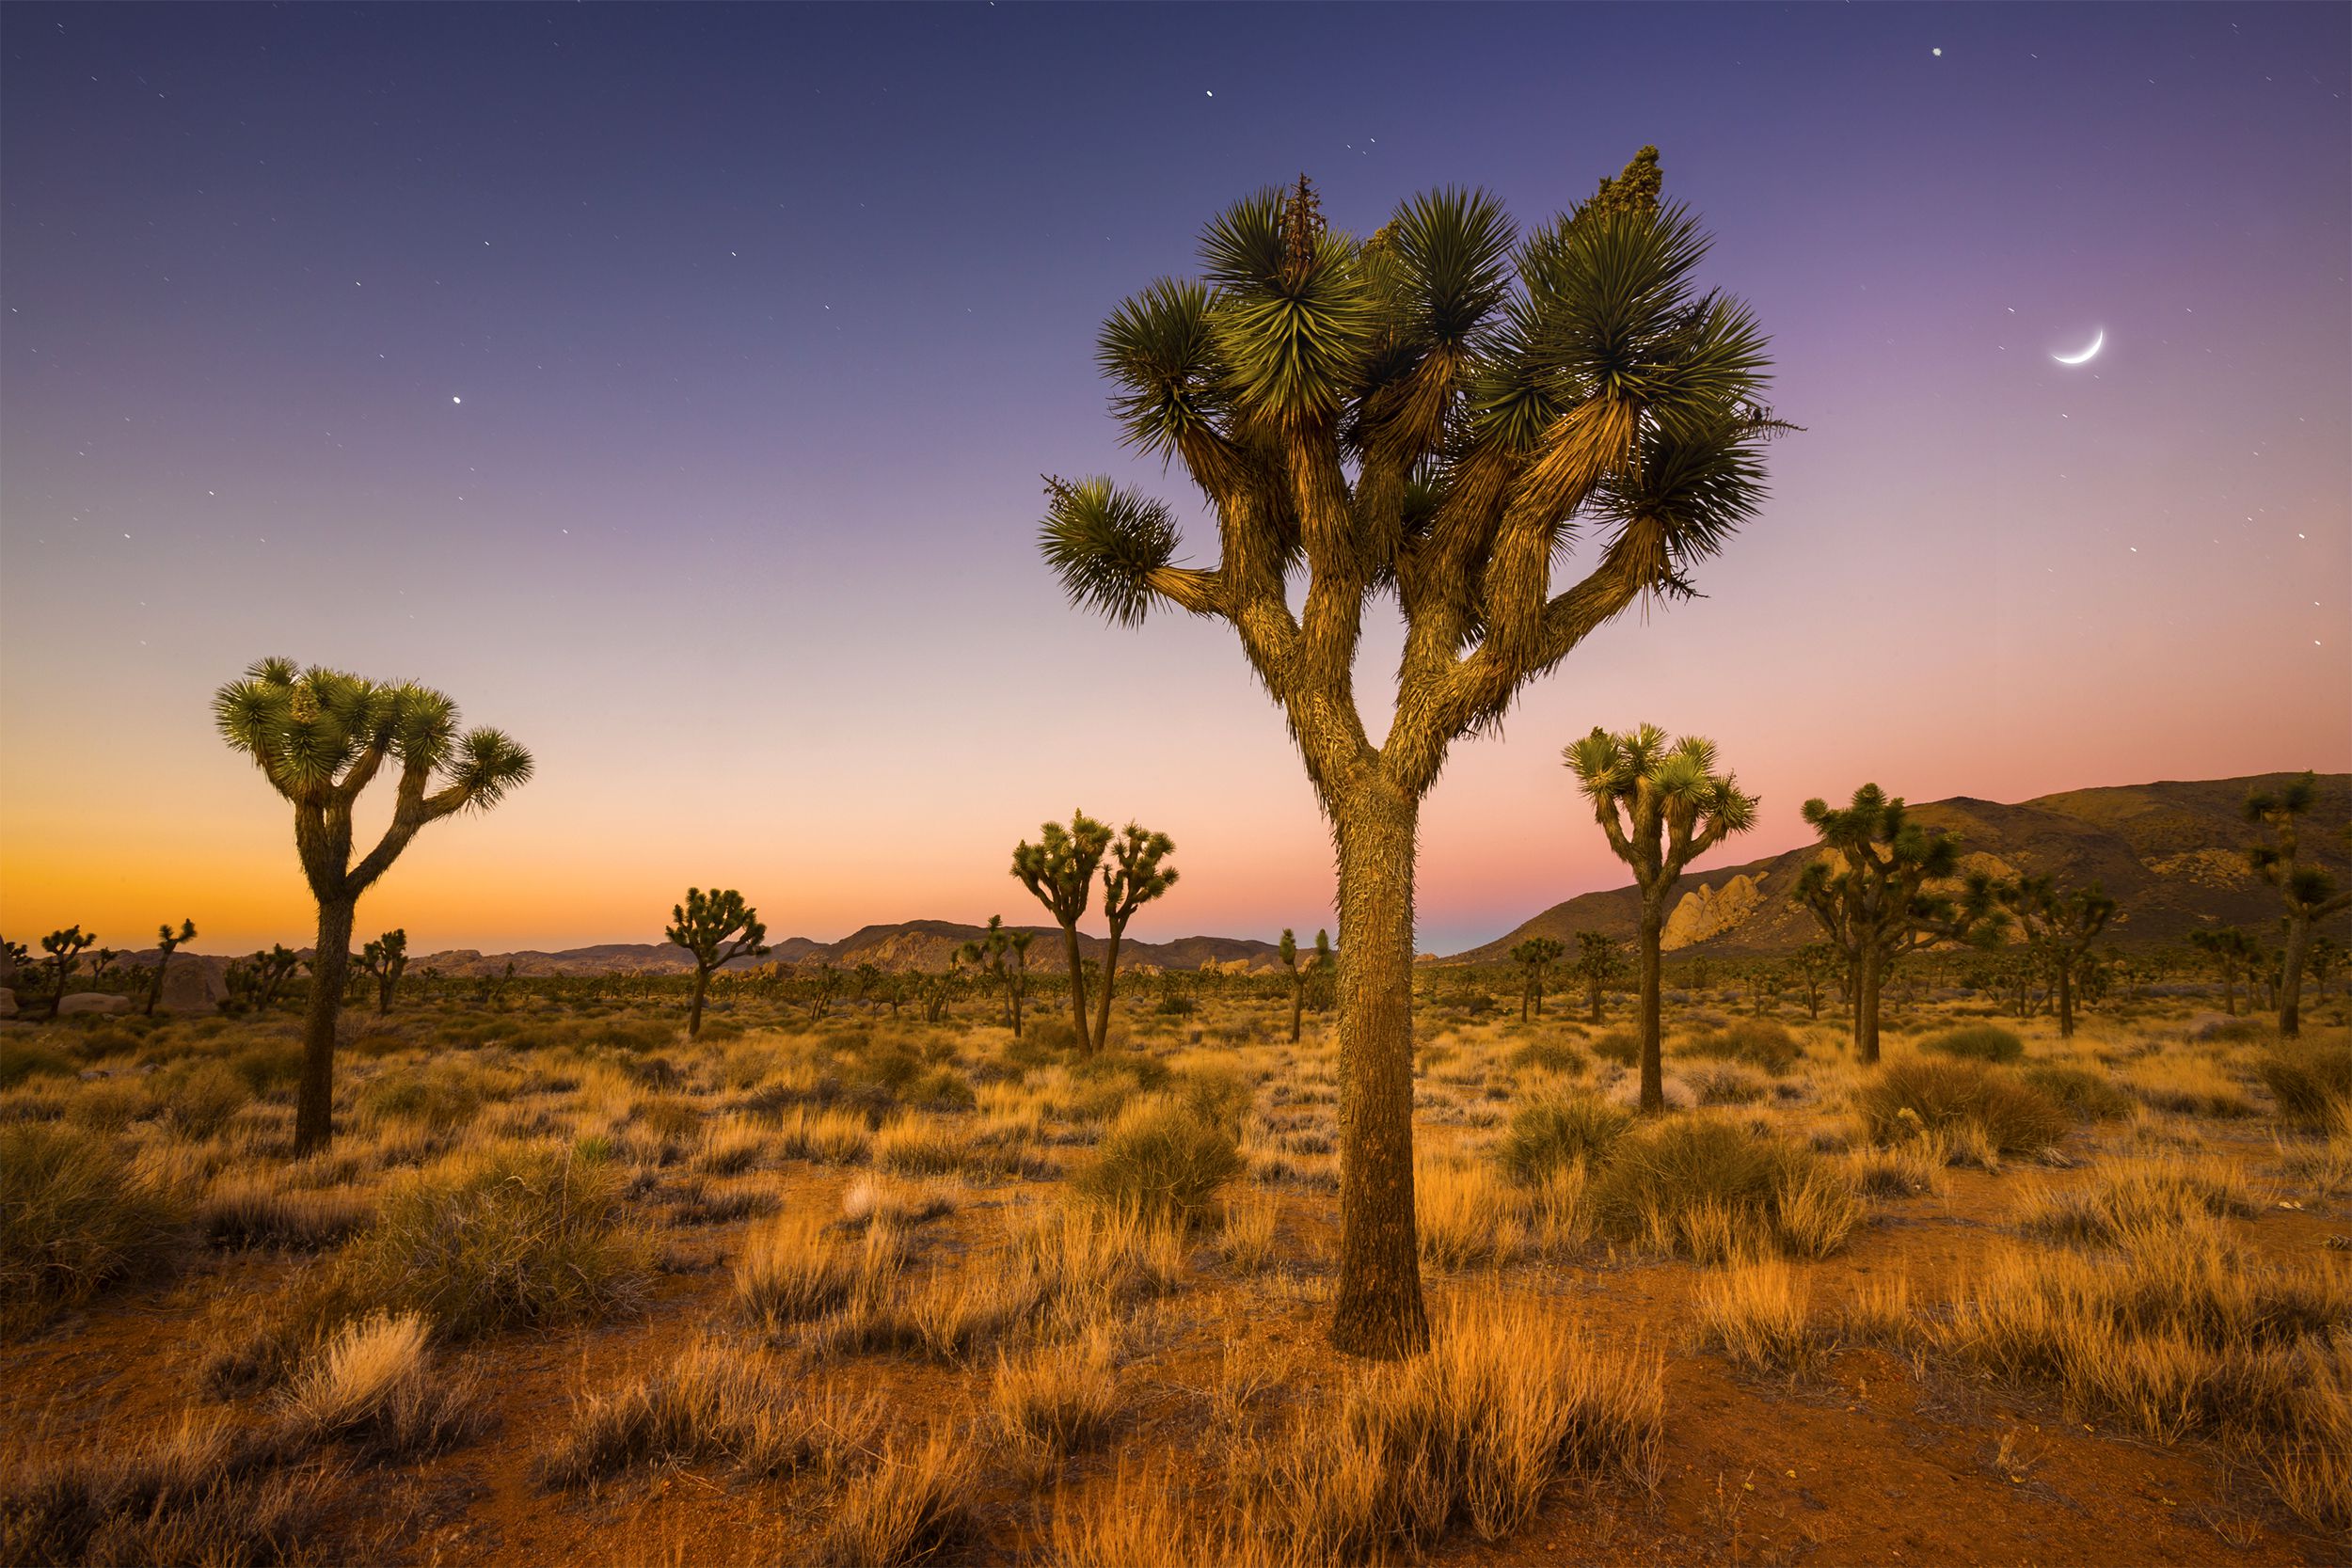 Named after the odd, prickly wonder that is the Joshua Tree, <a href="https://www.nps.gov/jotr/index.htm">this southern California park</a> encompasses both the Colorado and Mojave deserts. Within its striking and vast expanses (the park is some 800,000 acres), there's a variety of plants and animals as well as sand dunes, dry lakes, and rugged mountains.